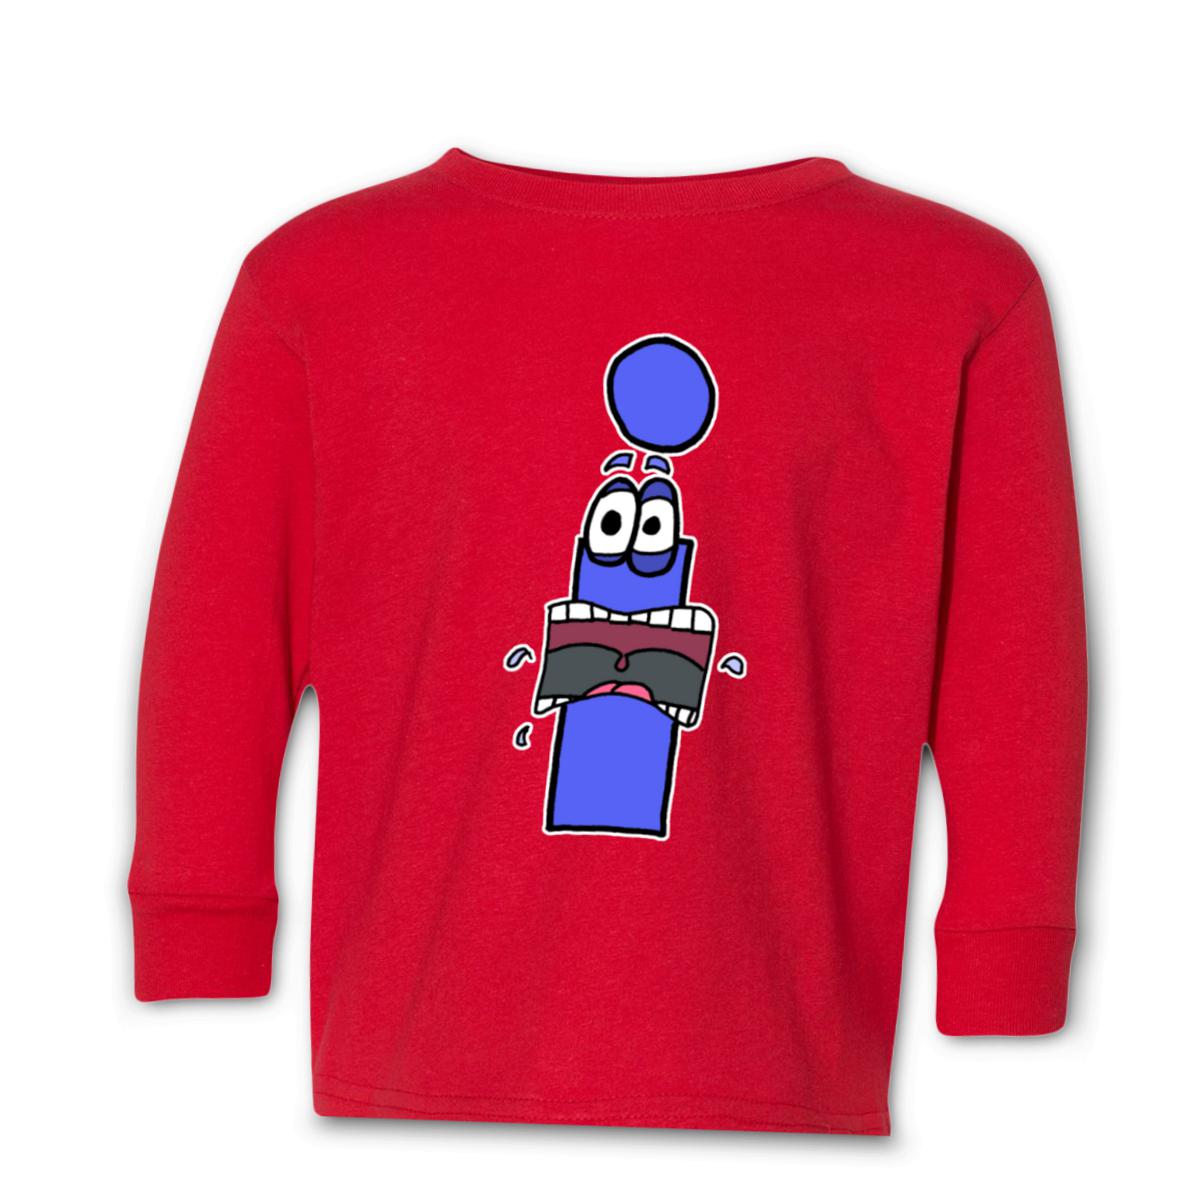 I Scream Toddler Long Sleeve Tee 4T red